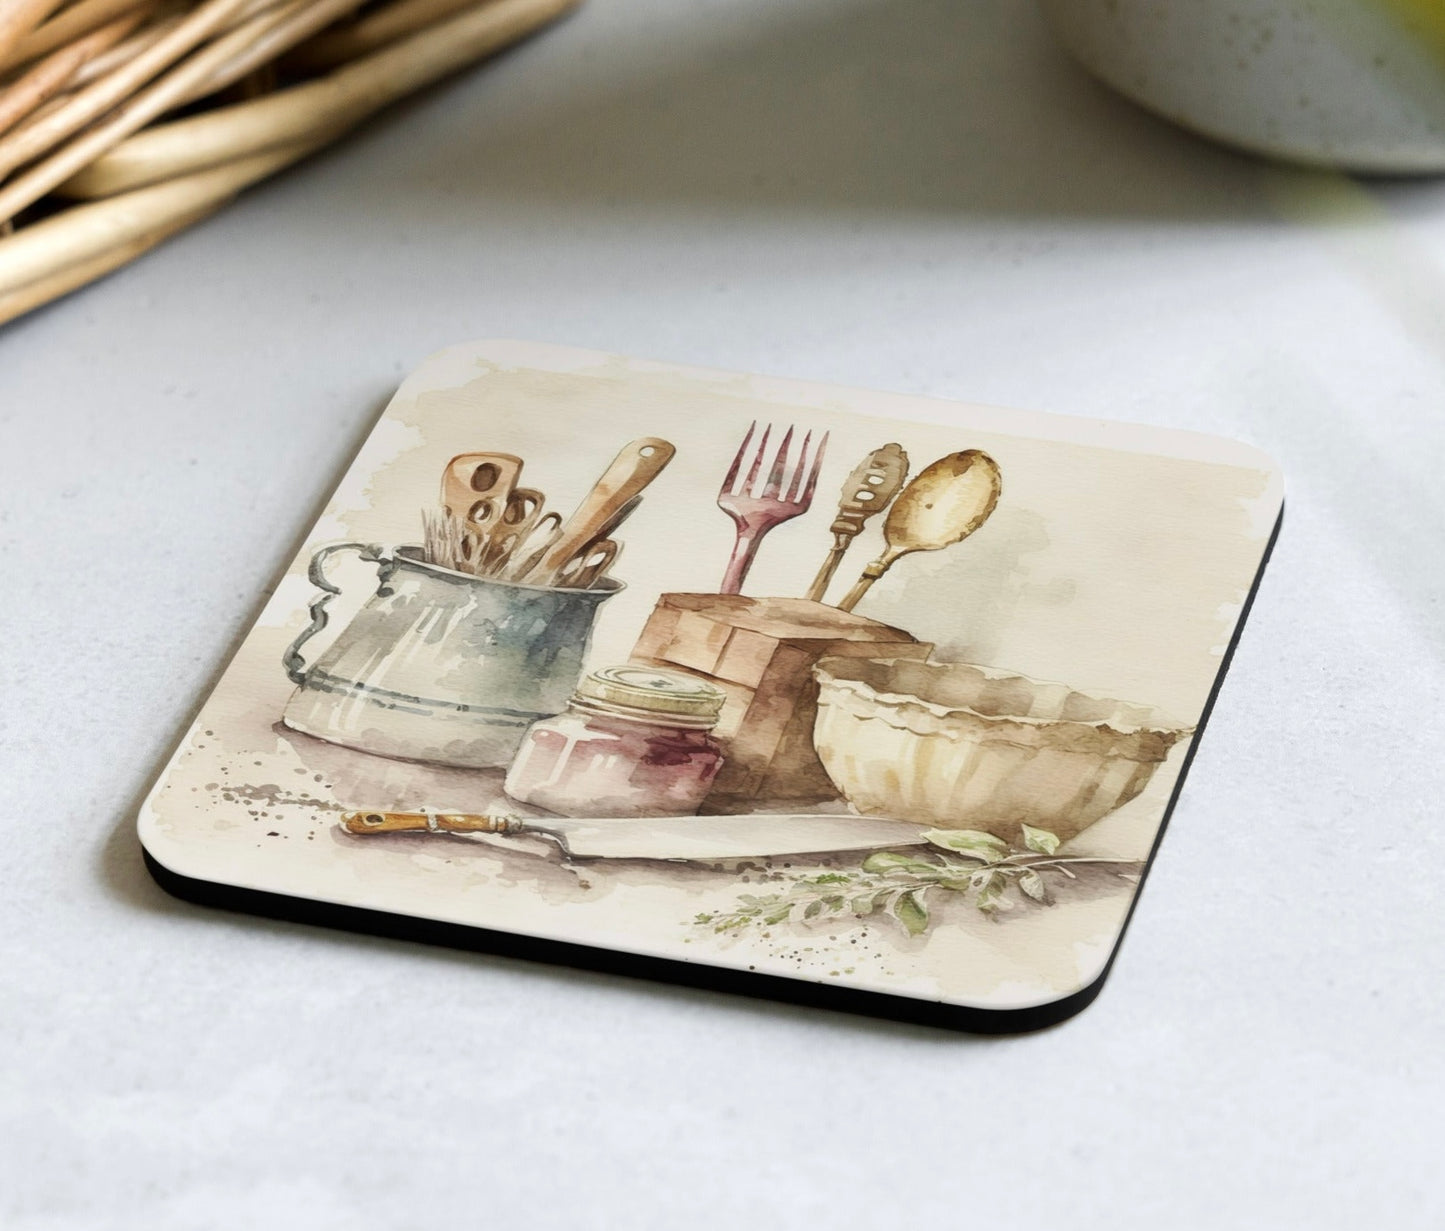 "Vintage Style Kitchen" Coaster - Weave Got Gifts - Unique Gifts You Won’t Find Anywhere Else!